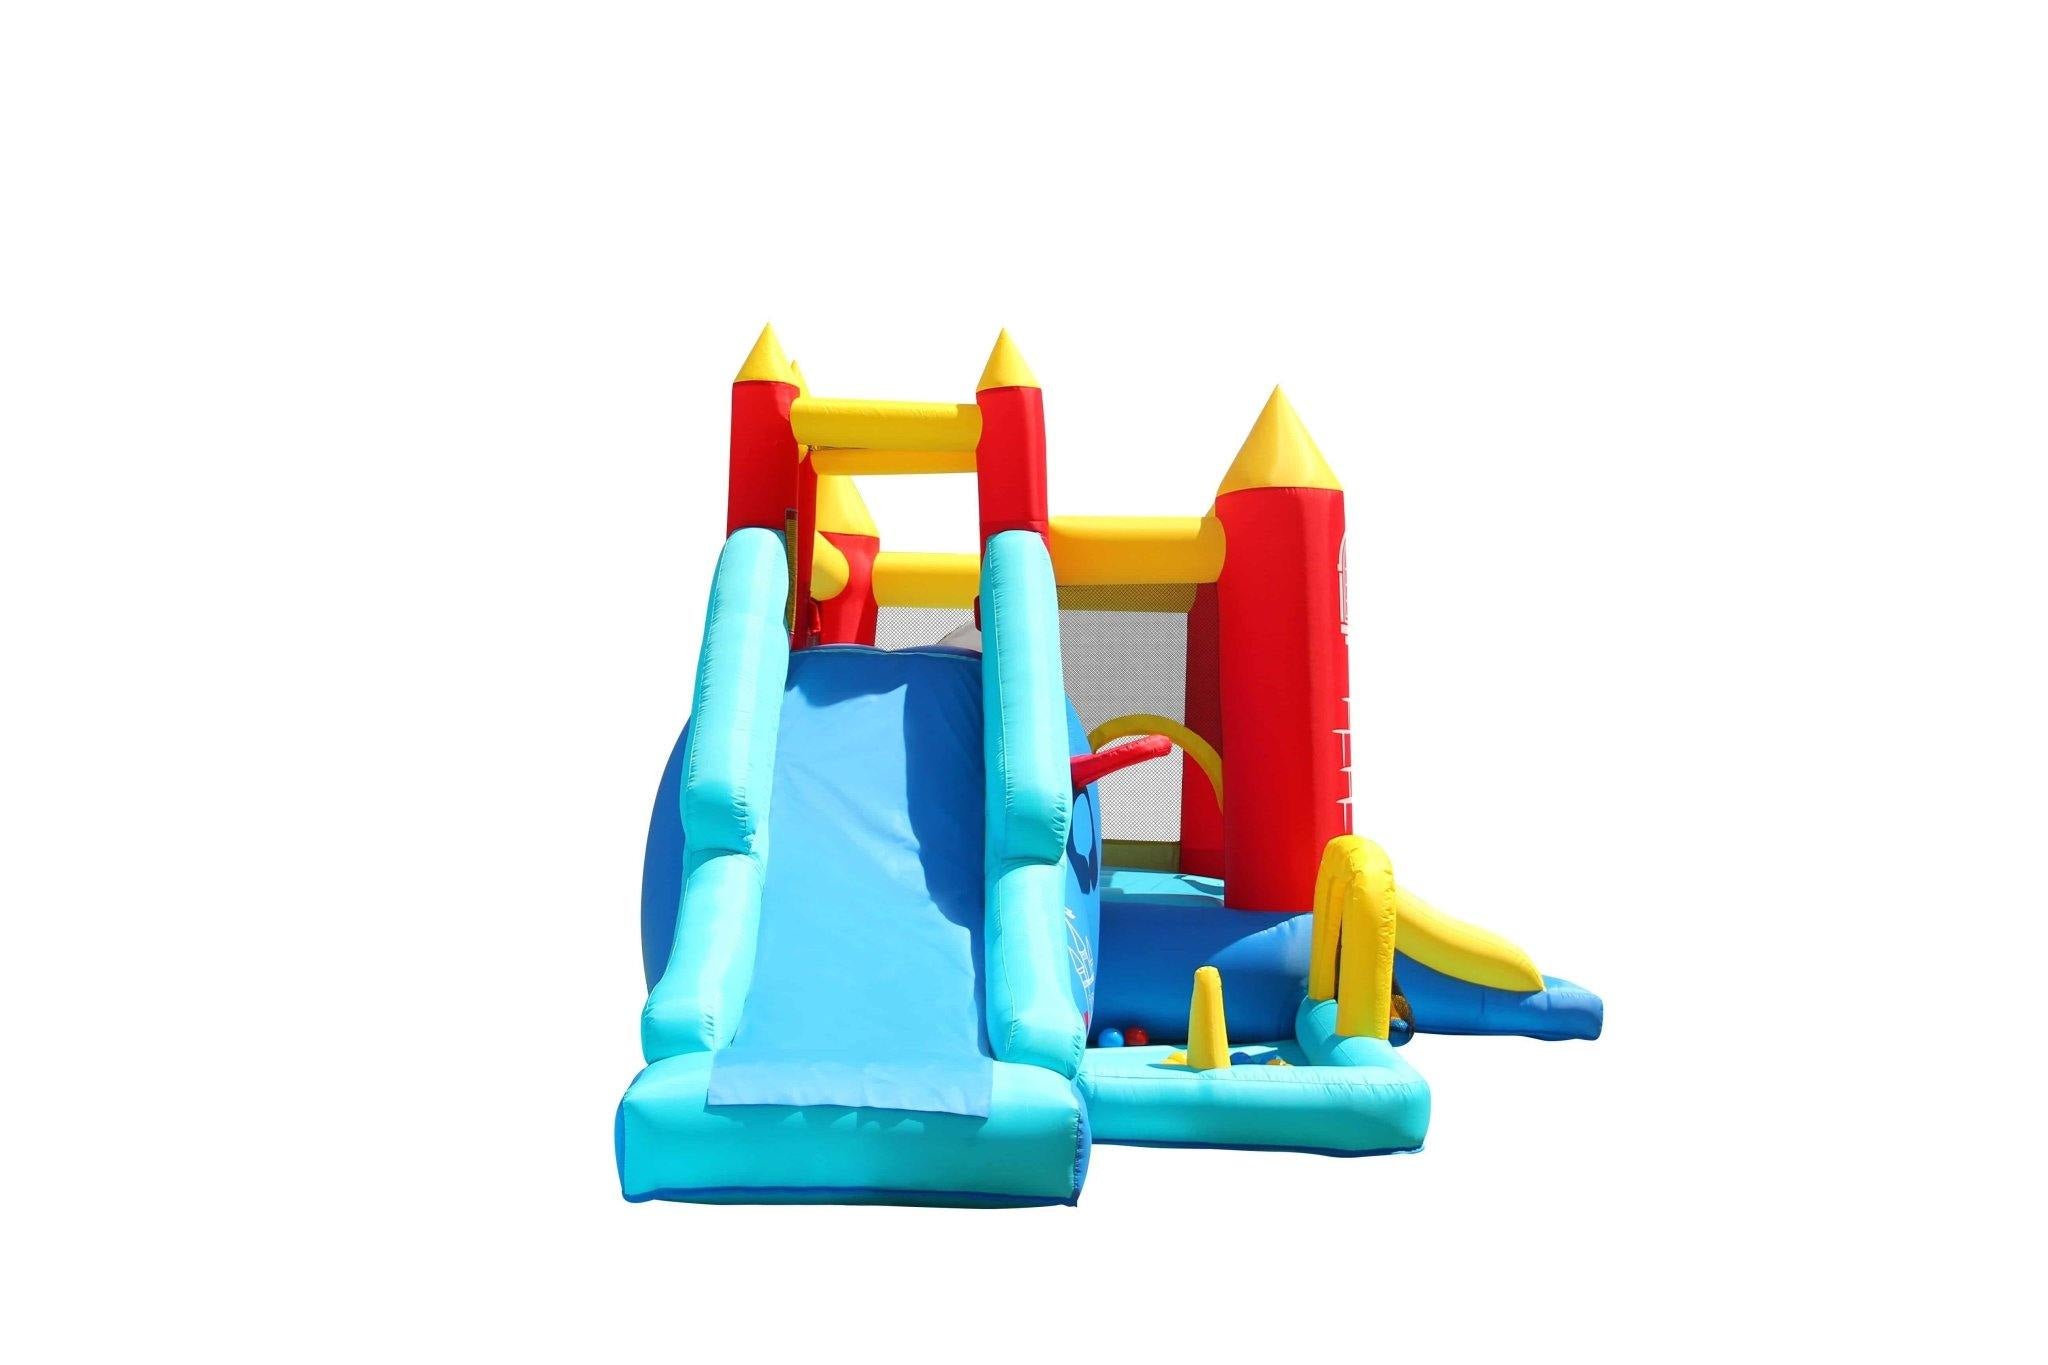 8 in 1 Jumping Castle - Dti Direct USA